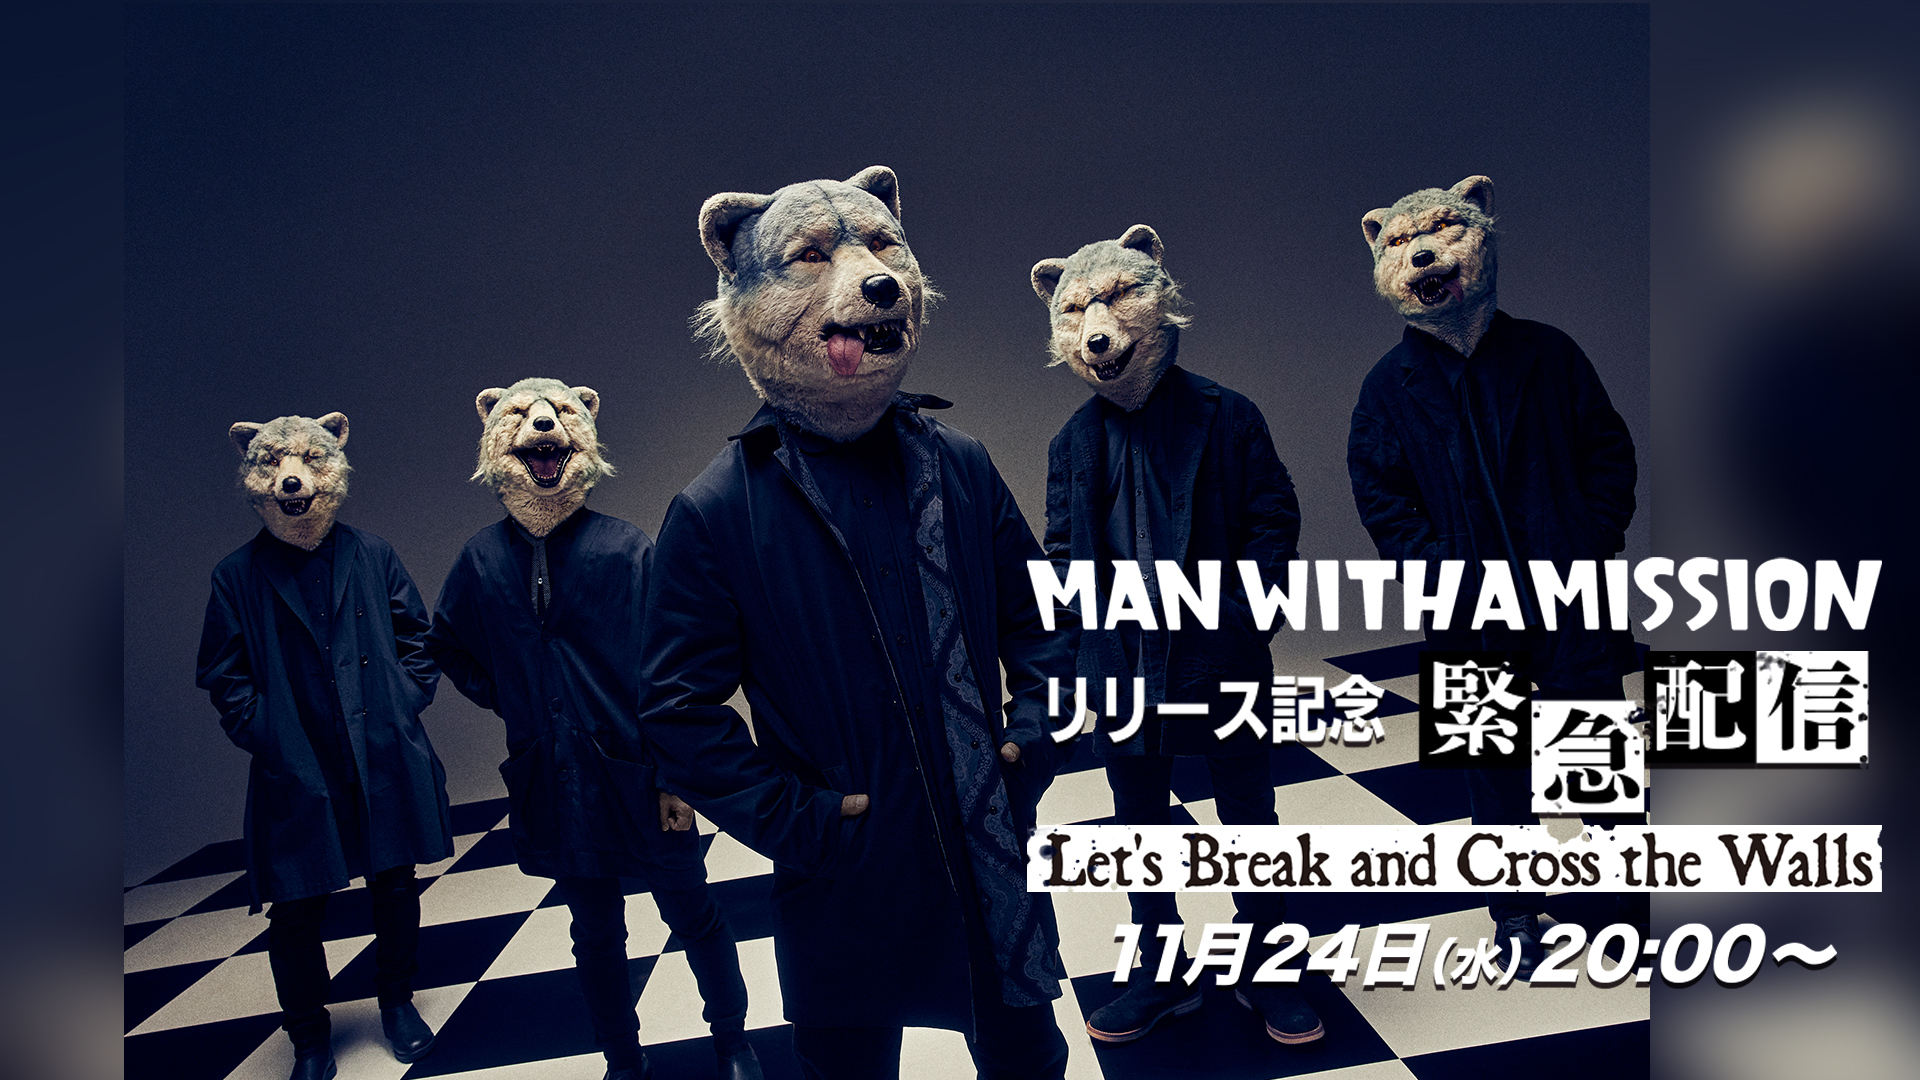 Man With A Mission アルバム発売記念の緊急特別番組の配信が決定 Man With A Mission